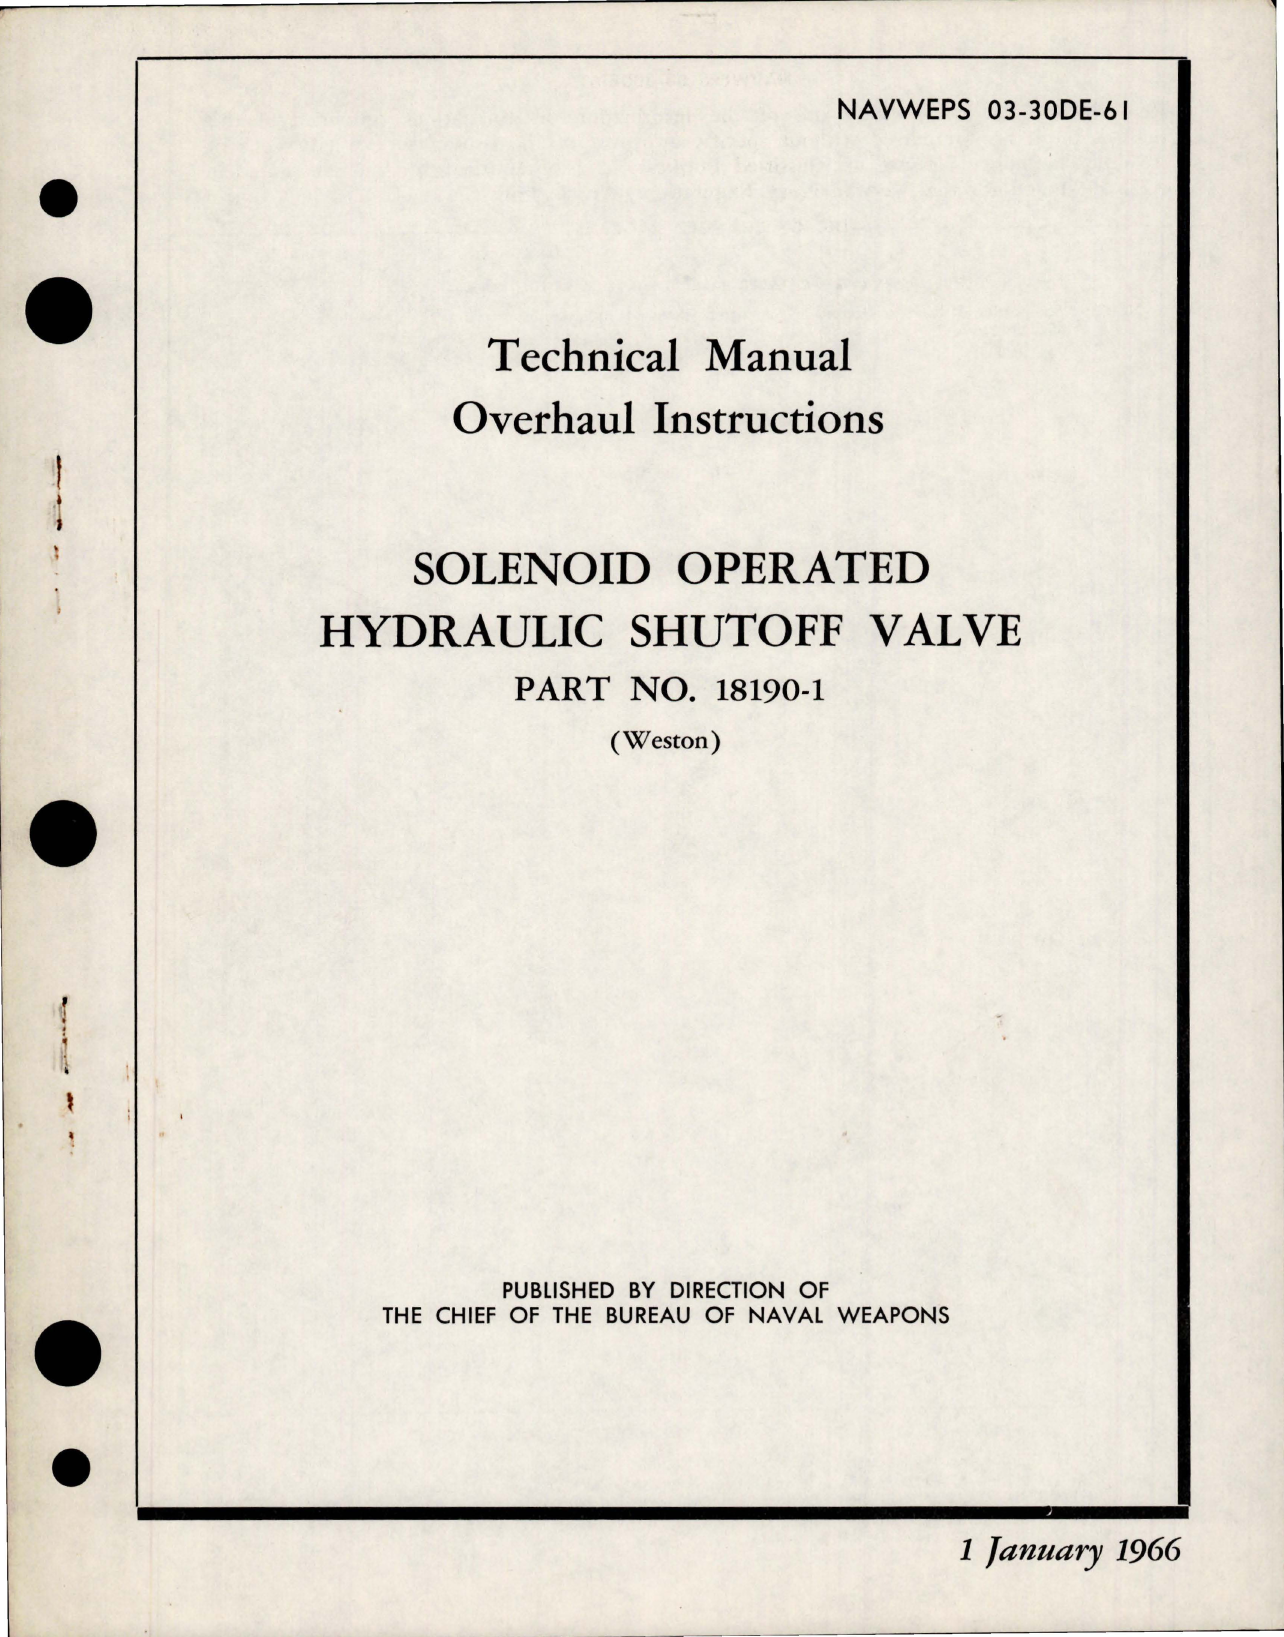 Sample page 1 from AirCorps Library document: Overhaul Instructions for Solenoid Operated Hydraulic Shutoff Valve - Part 18190-1